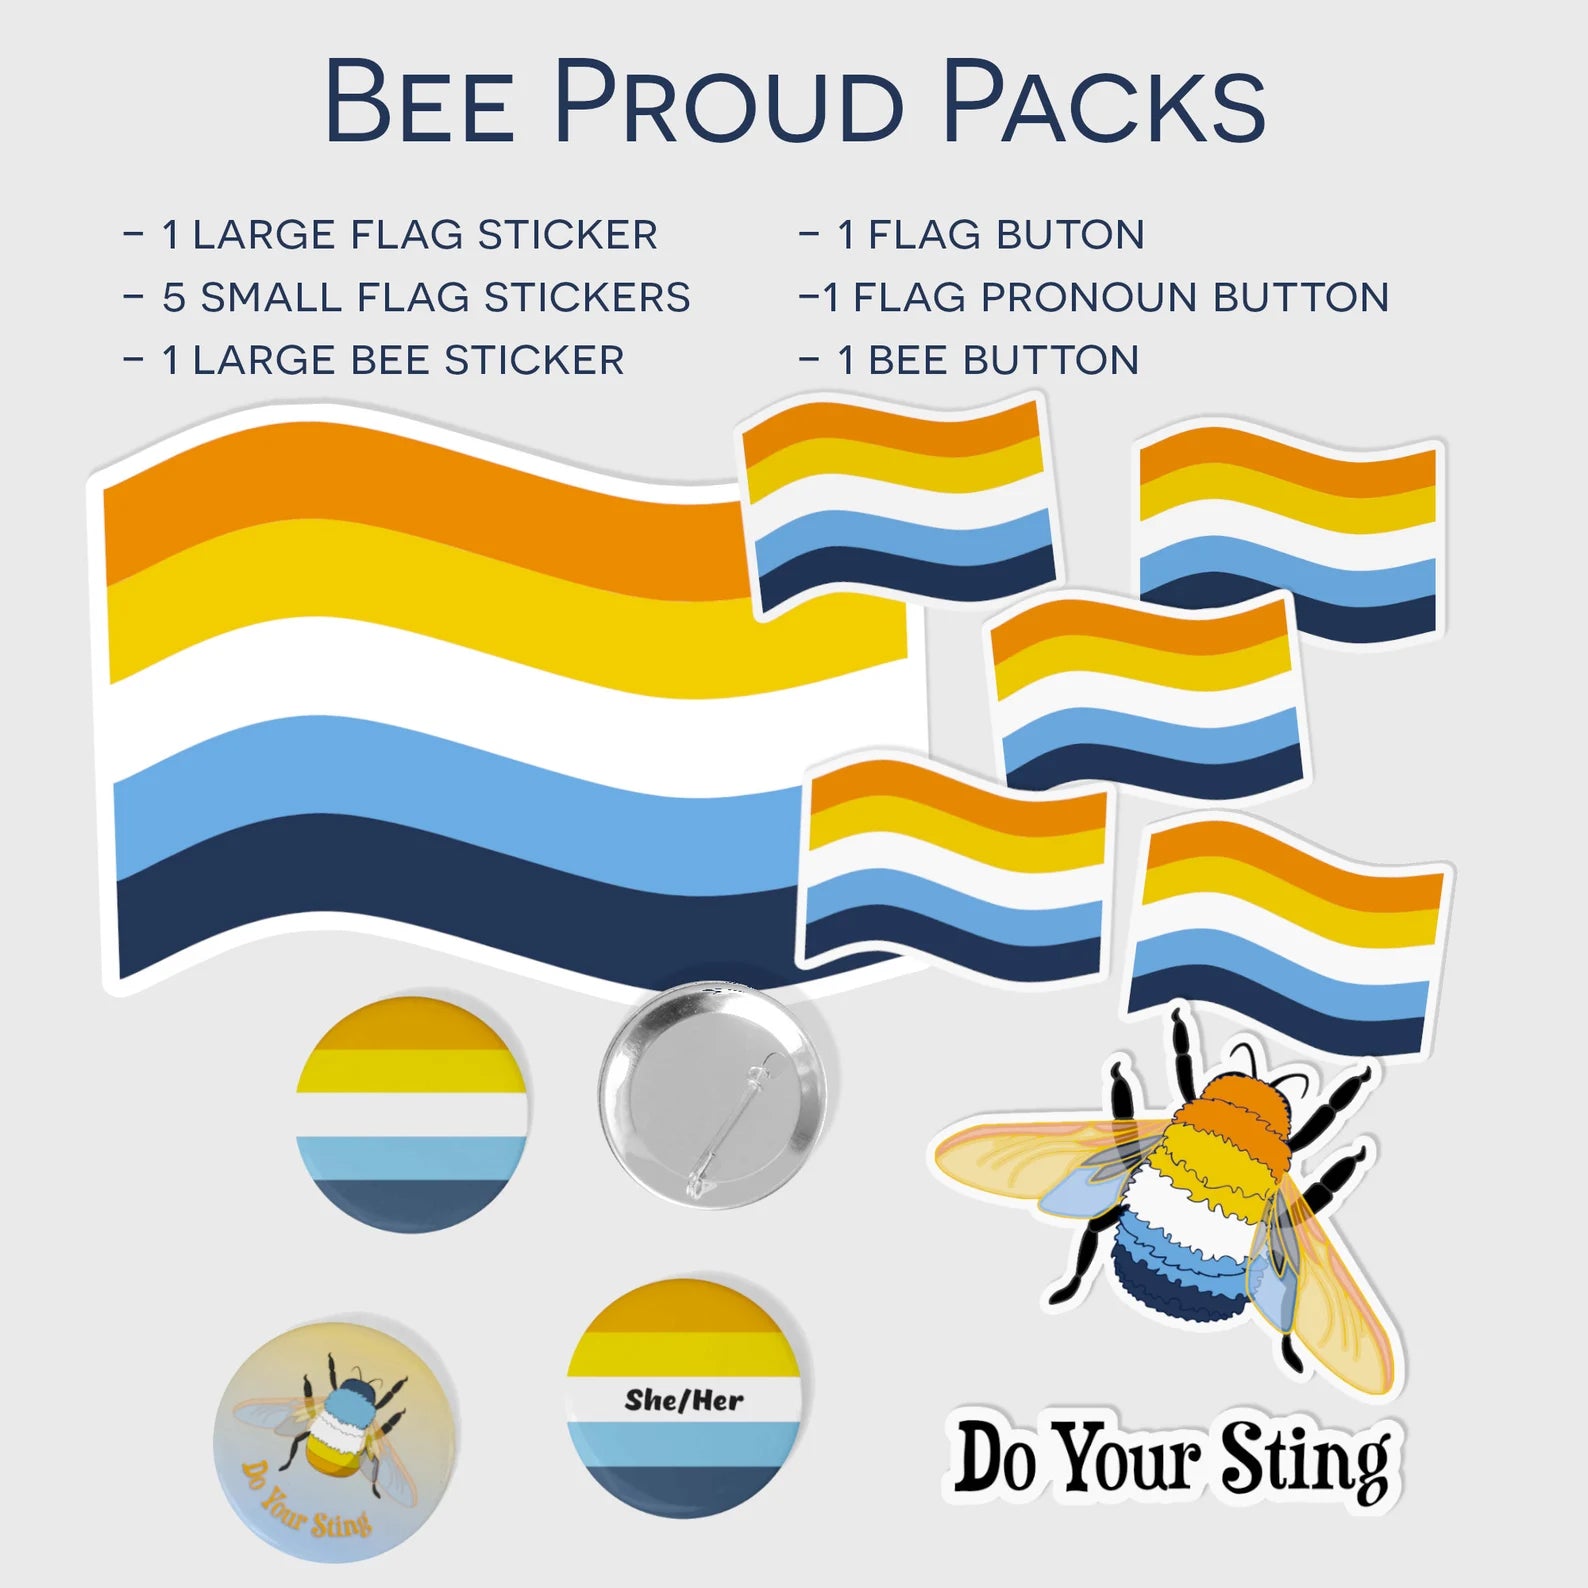 Image of the Bee Proud Pack, showing 1 lg & 5 small waving flag stickers, 1 lg bee sticker, and 3 buttons